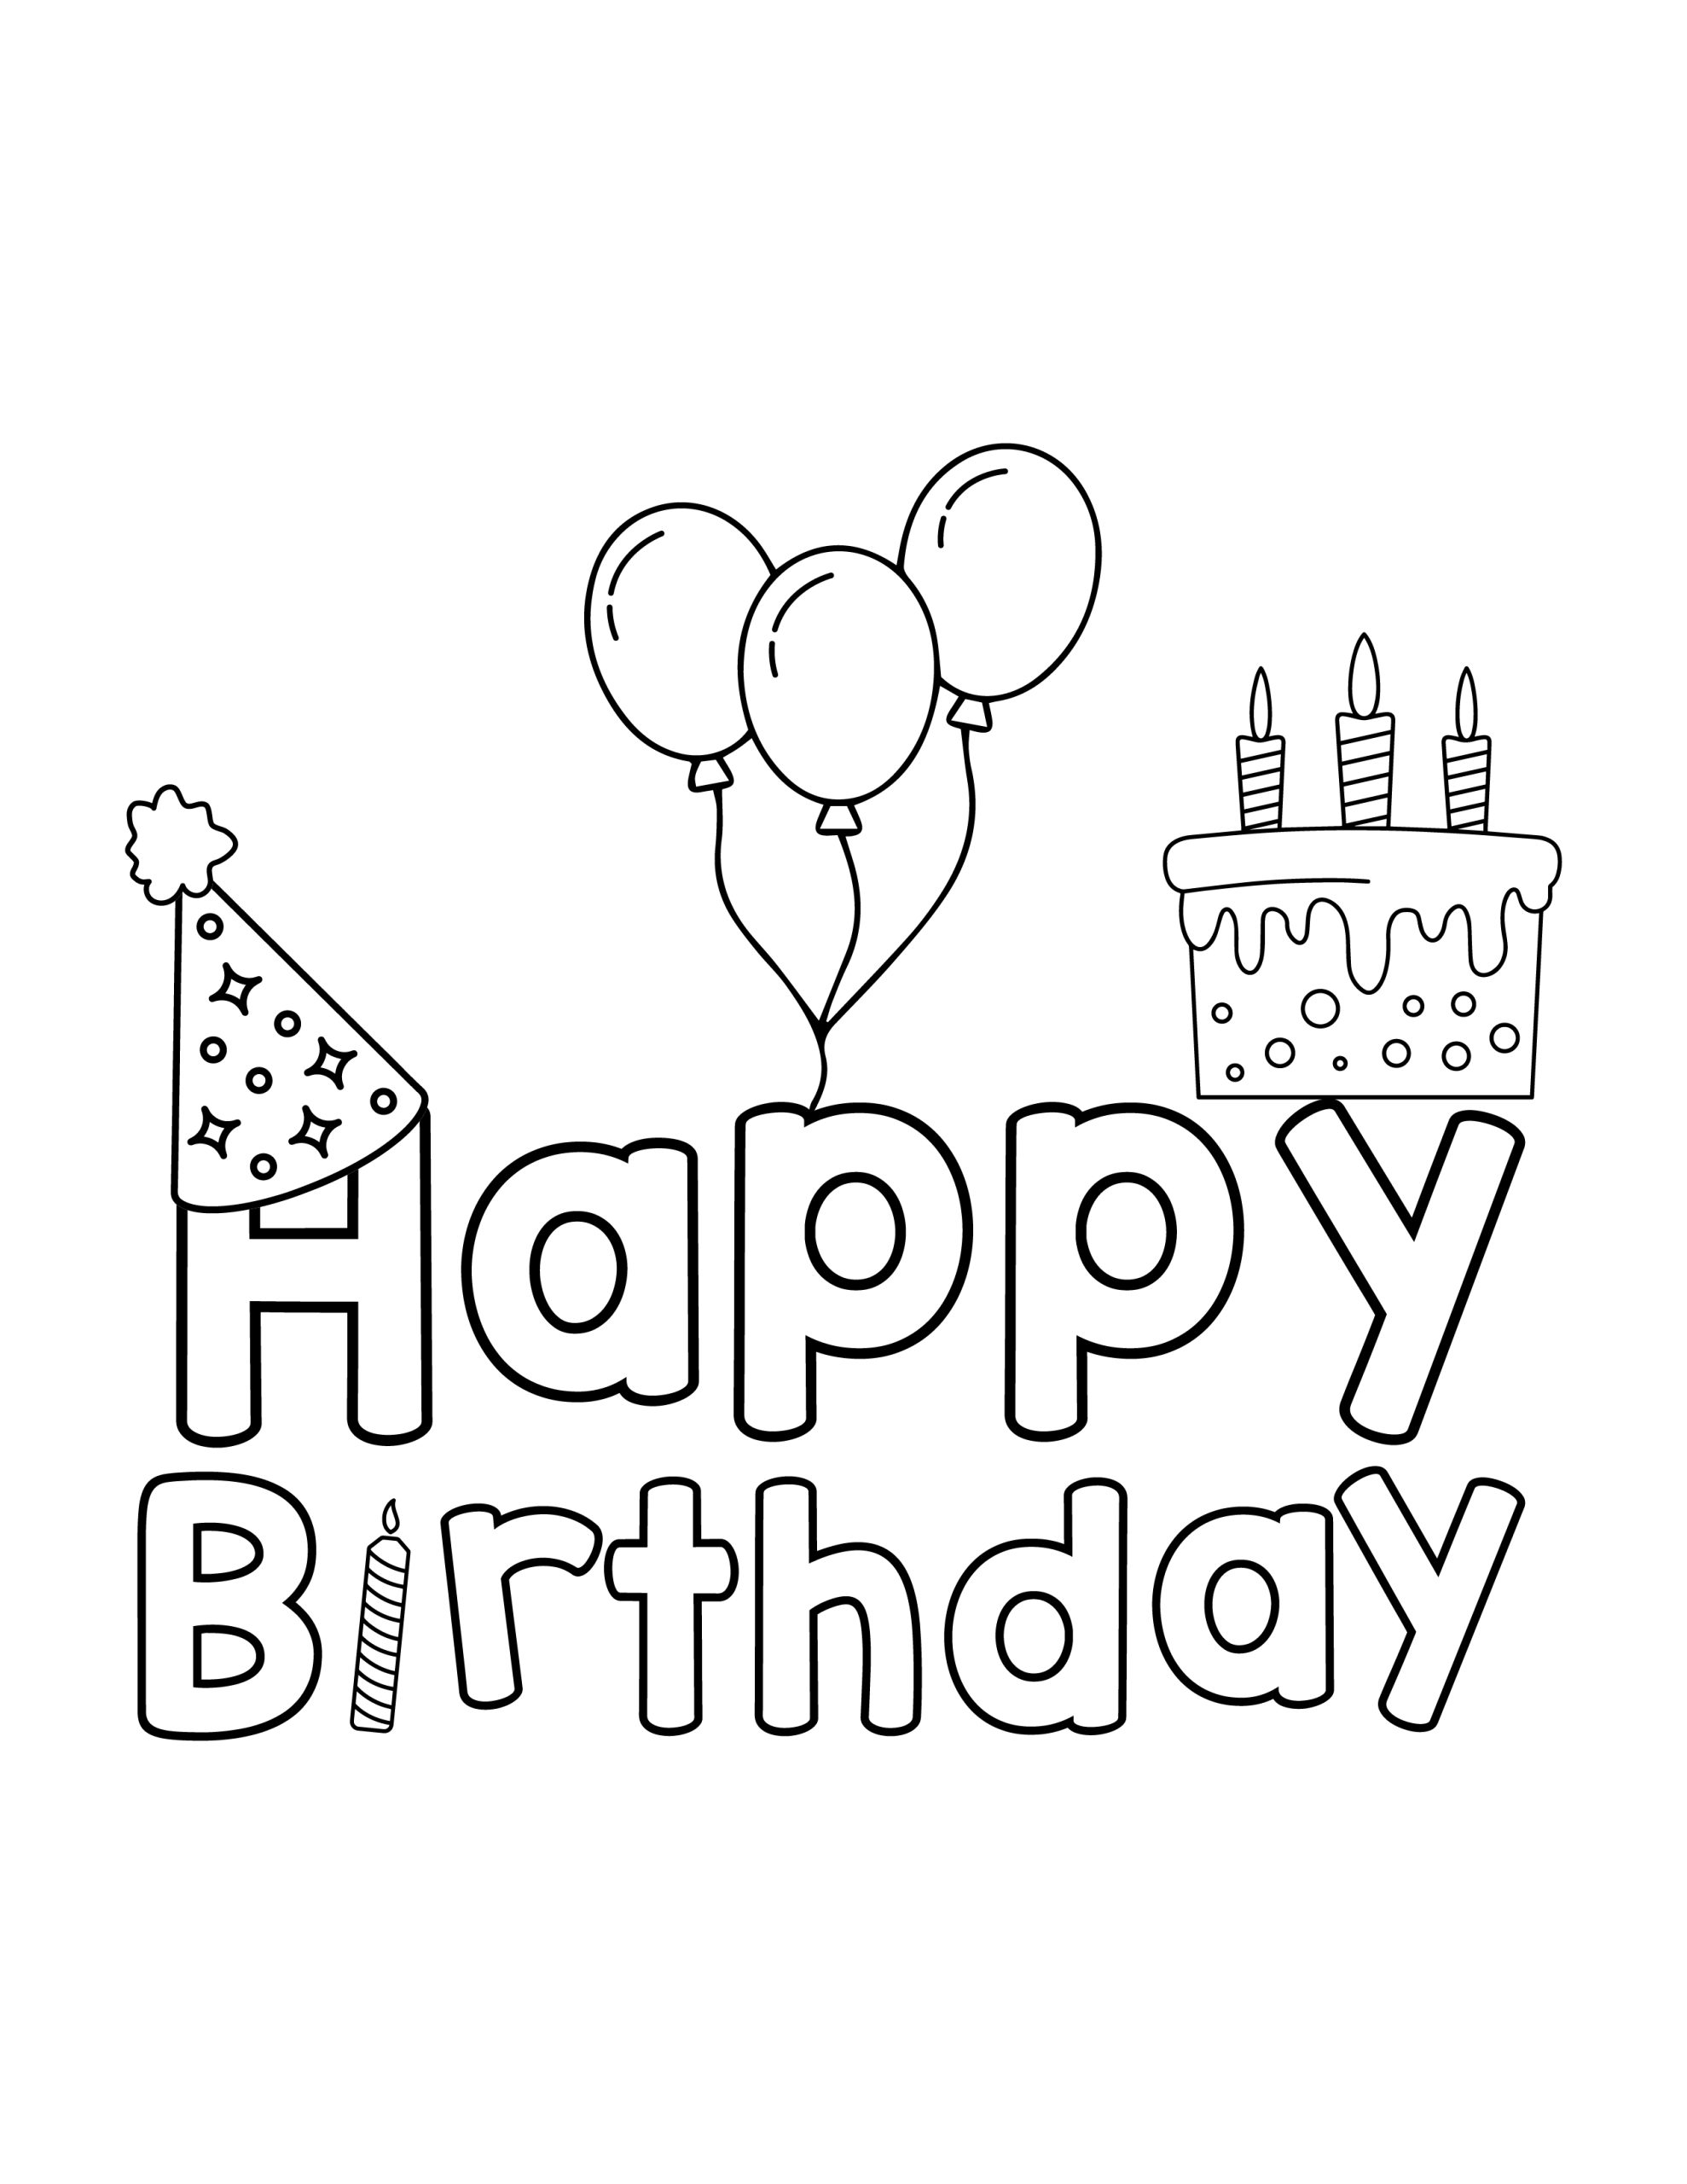 Cute Happy Birthday Coloring Pages (Free Printable) - The Study Kits